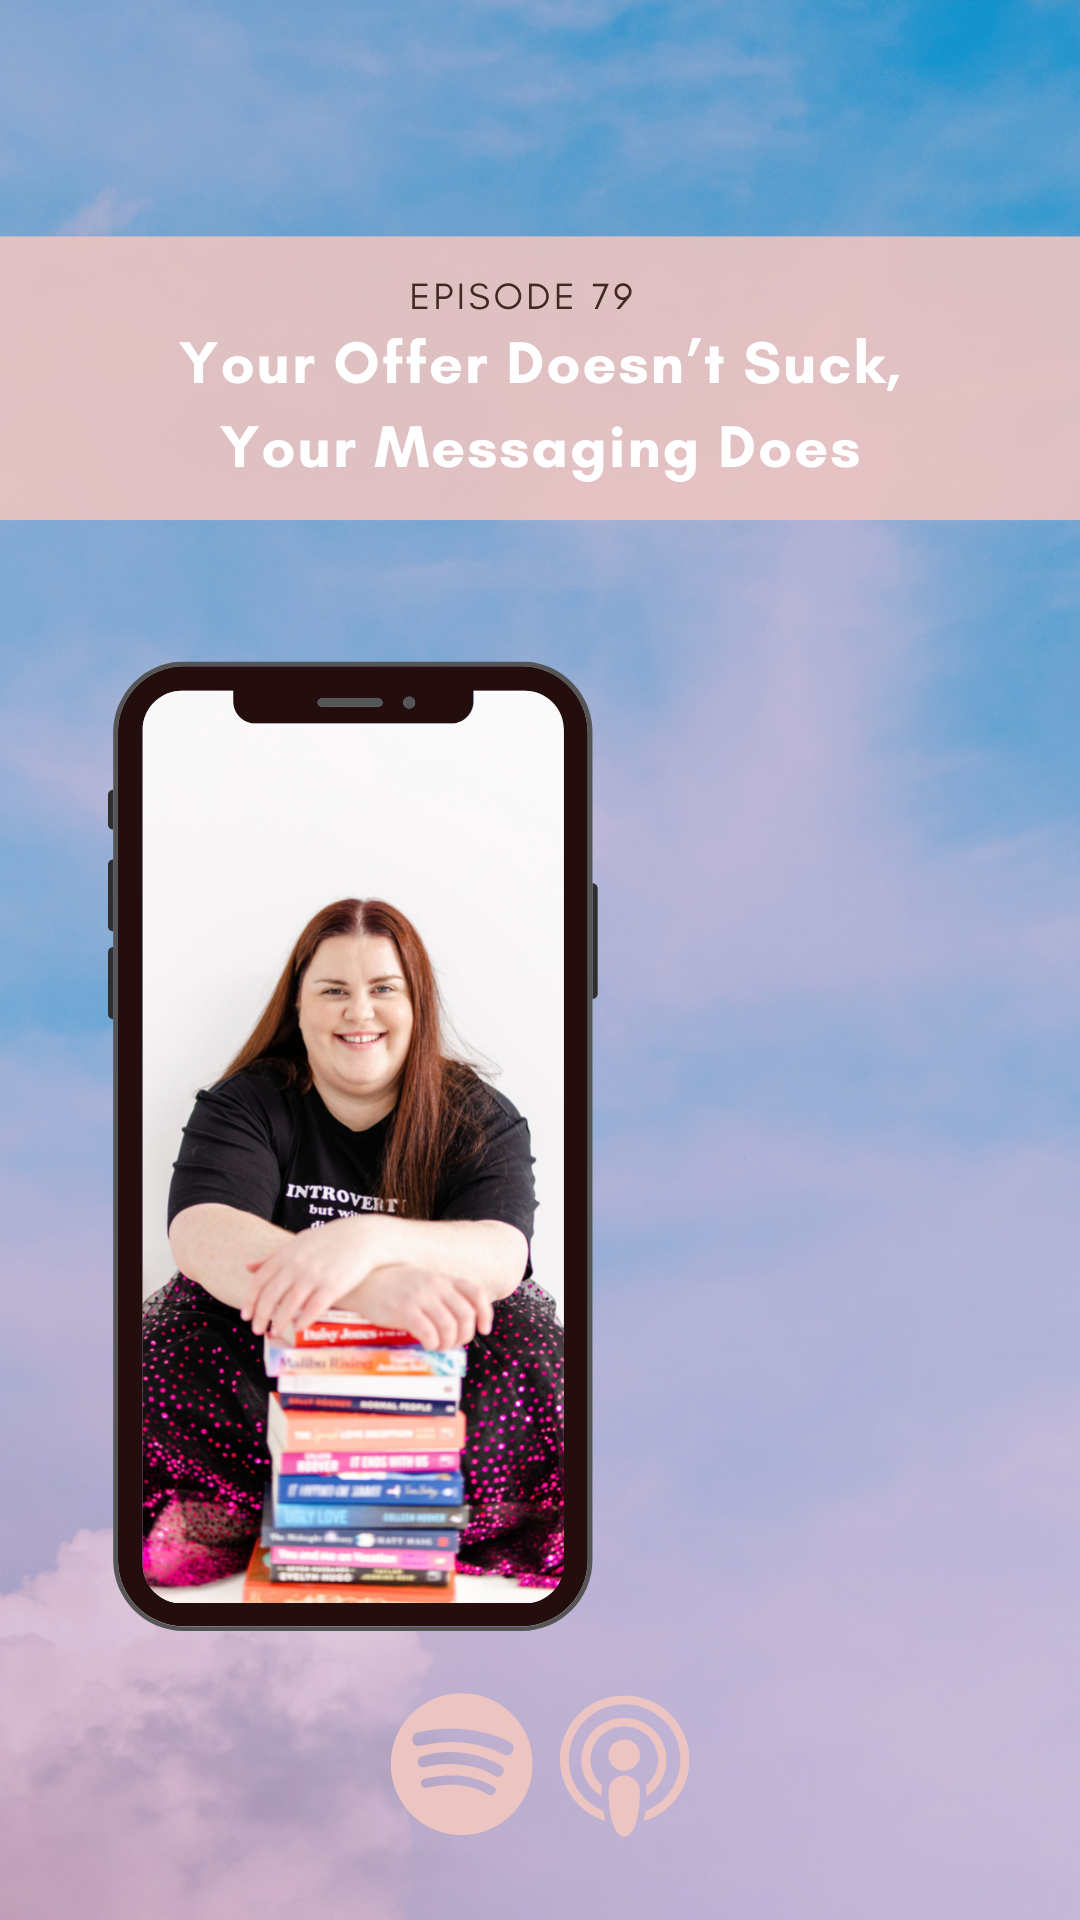 Your Offer Doesn’t Suck, Your Messaging Does